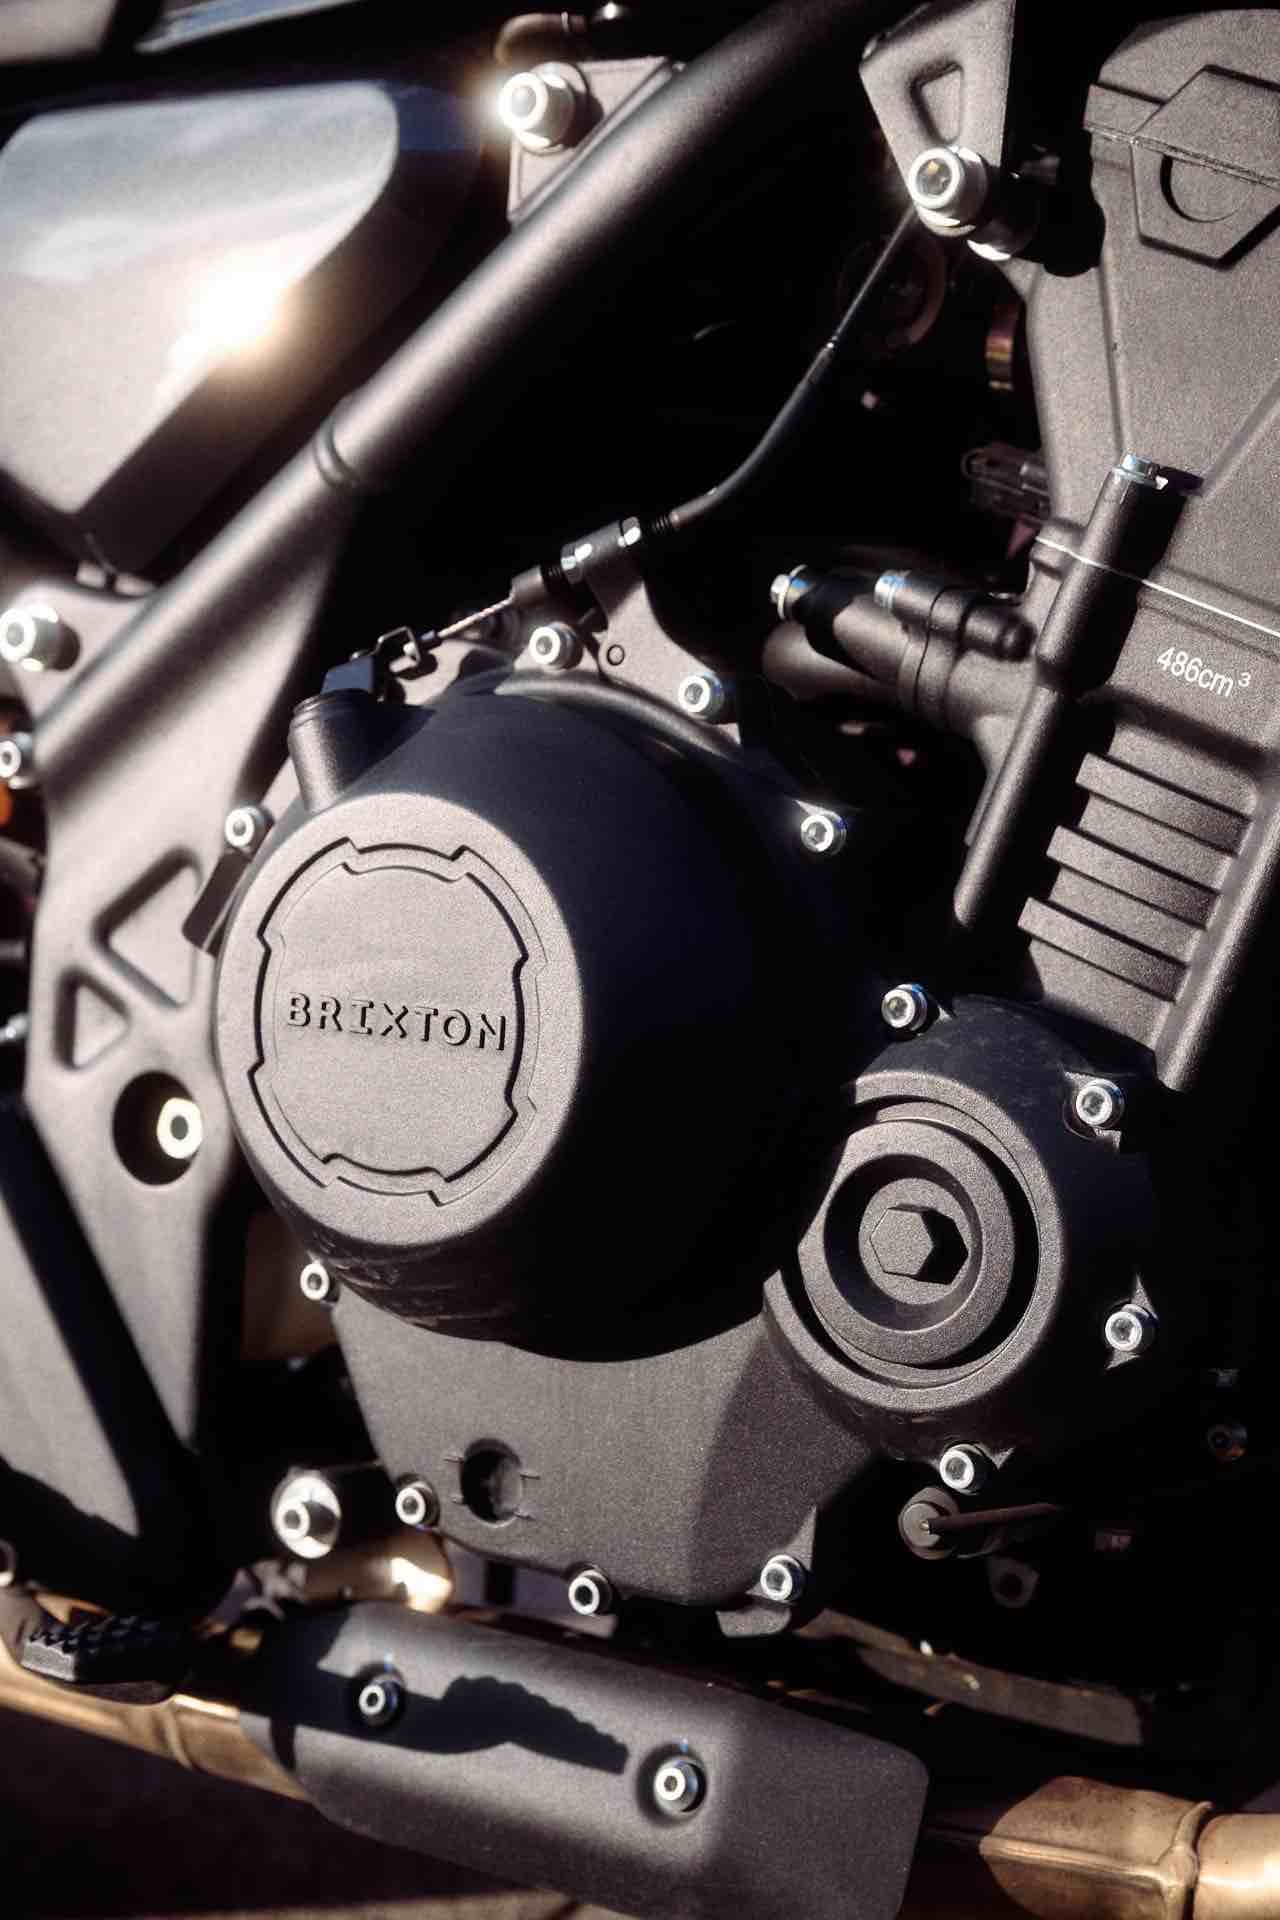 Brixton crossfire caferacer